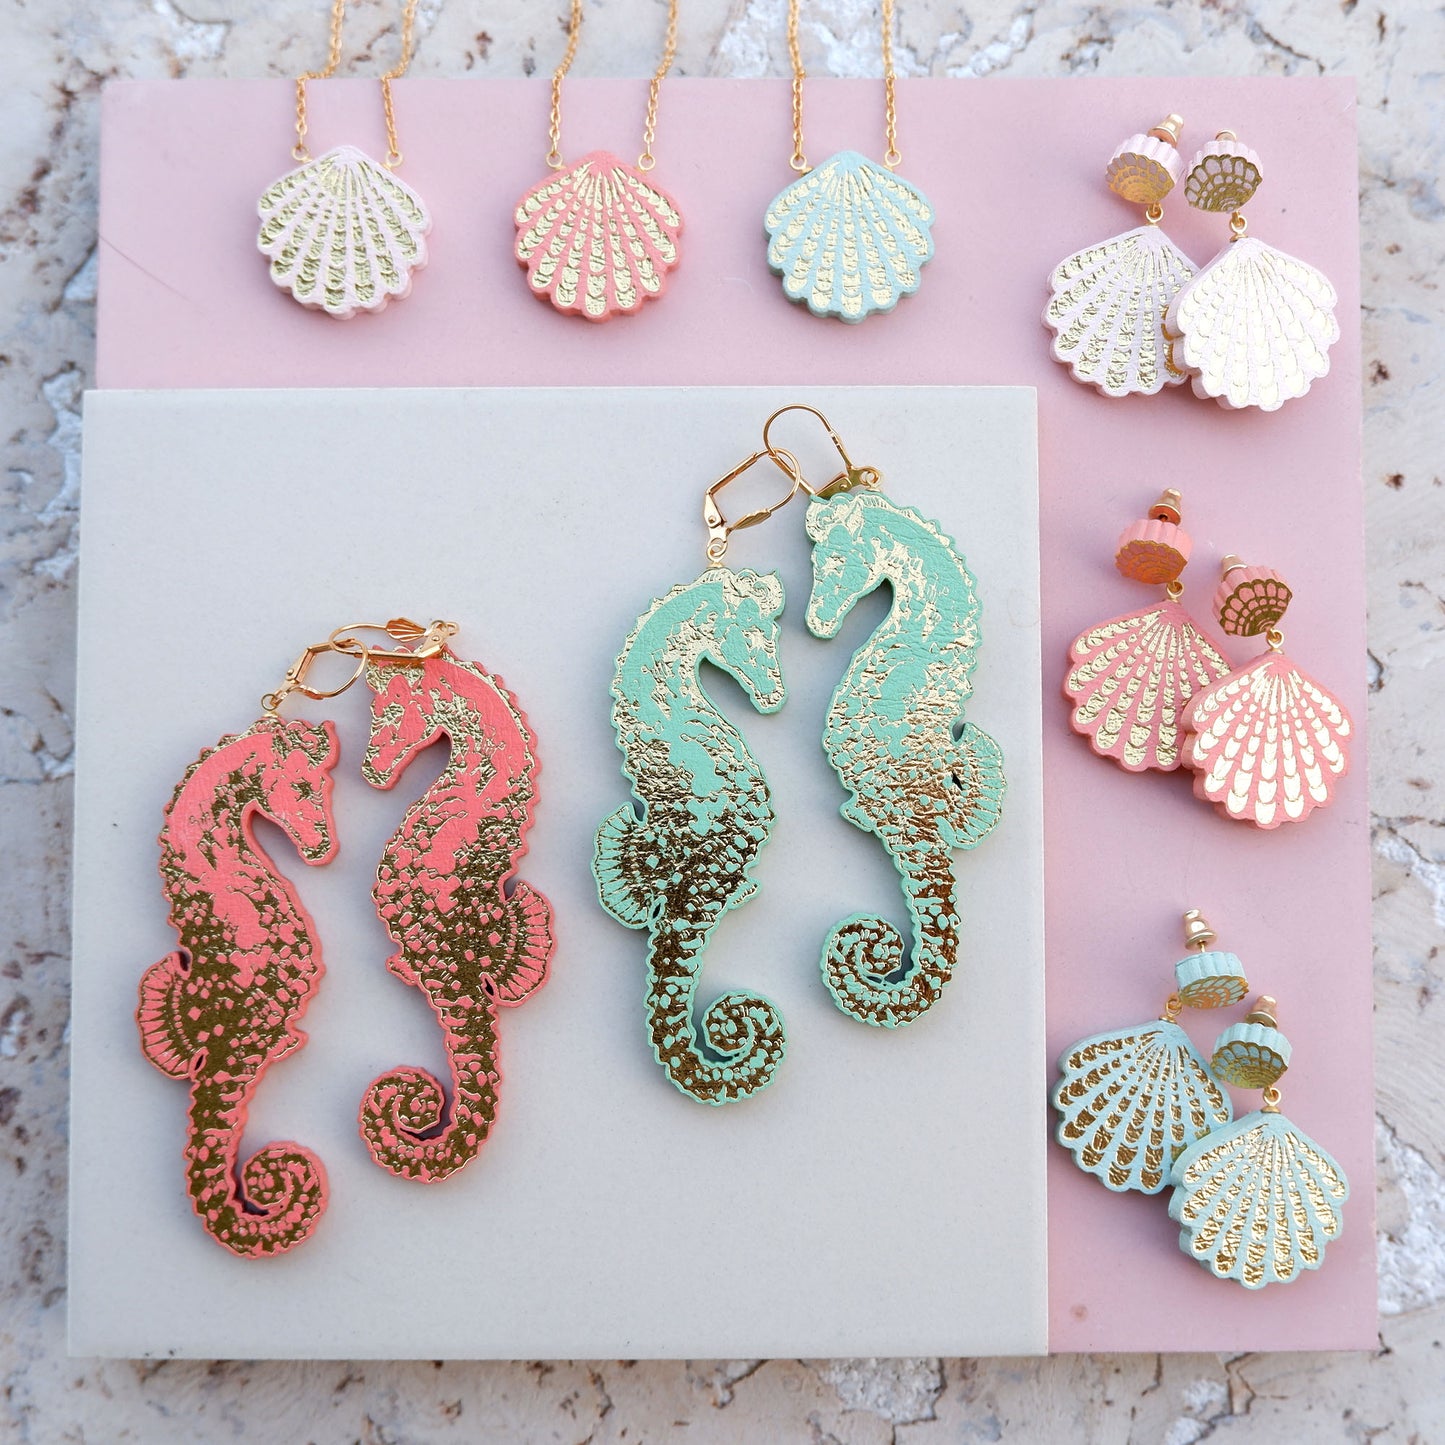 selection of plant based meramid inspired  jewellery. seahorse earrings, sea shell earrings & pendant., all in pastel colours